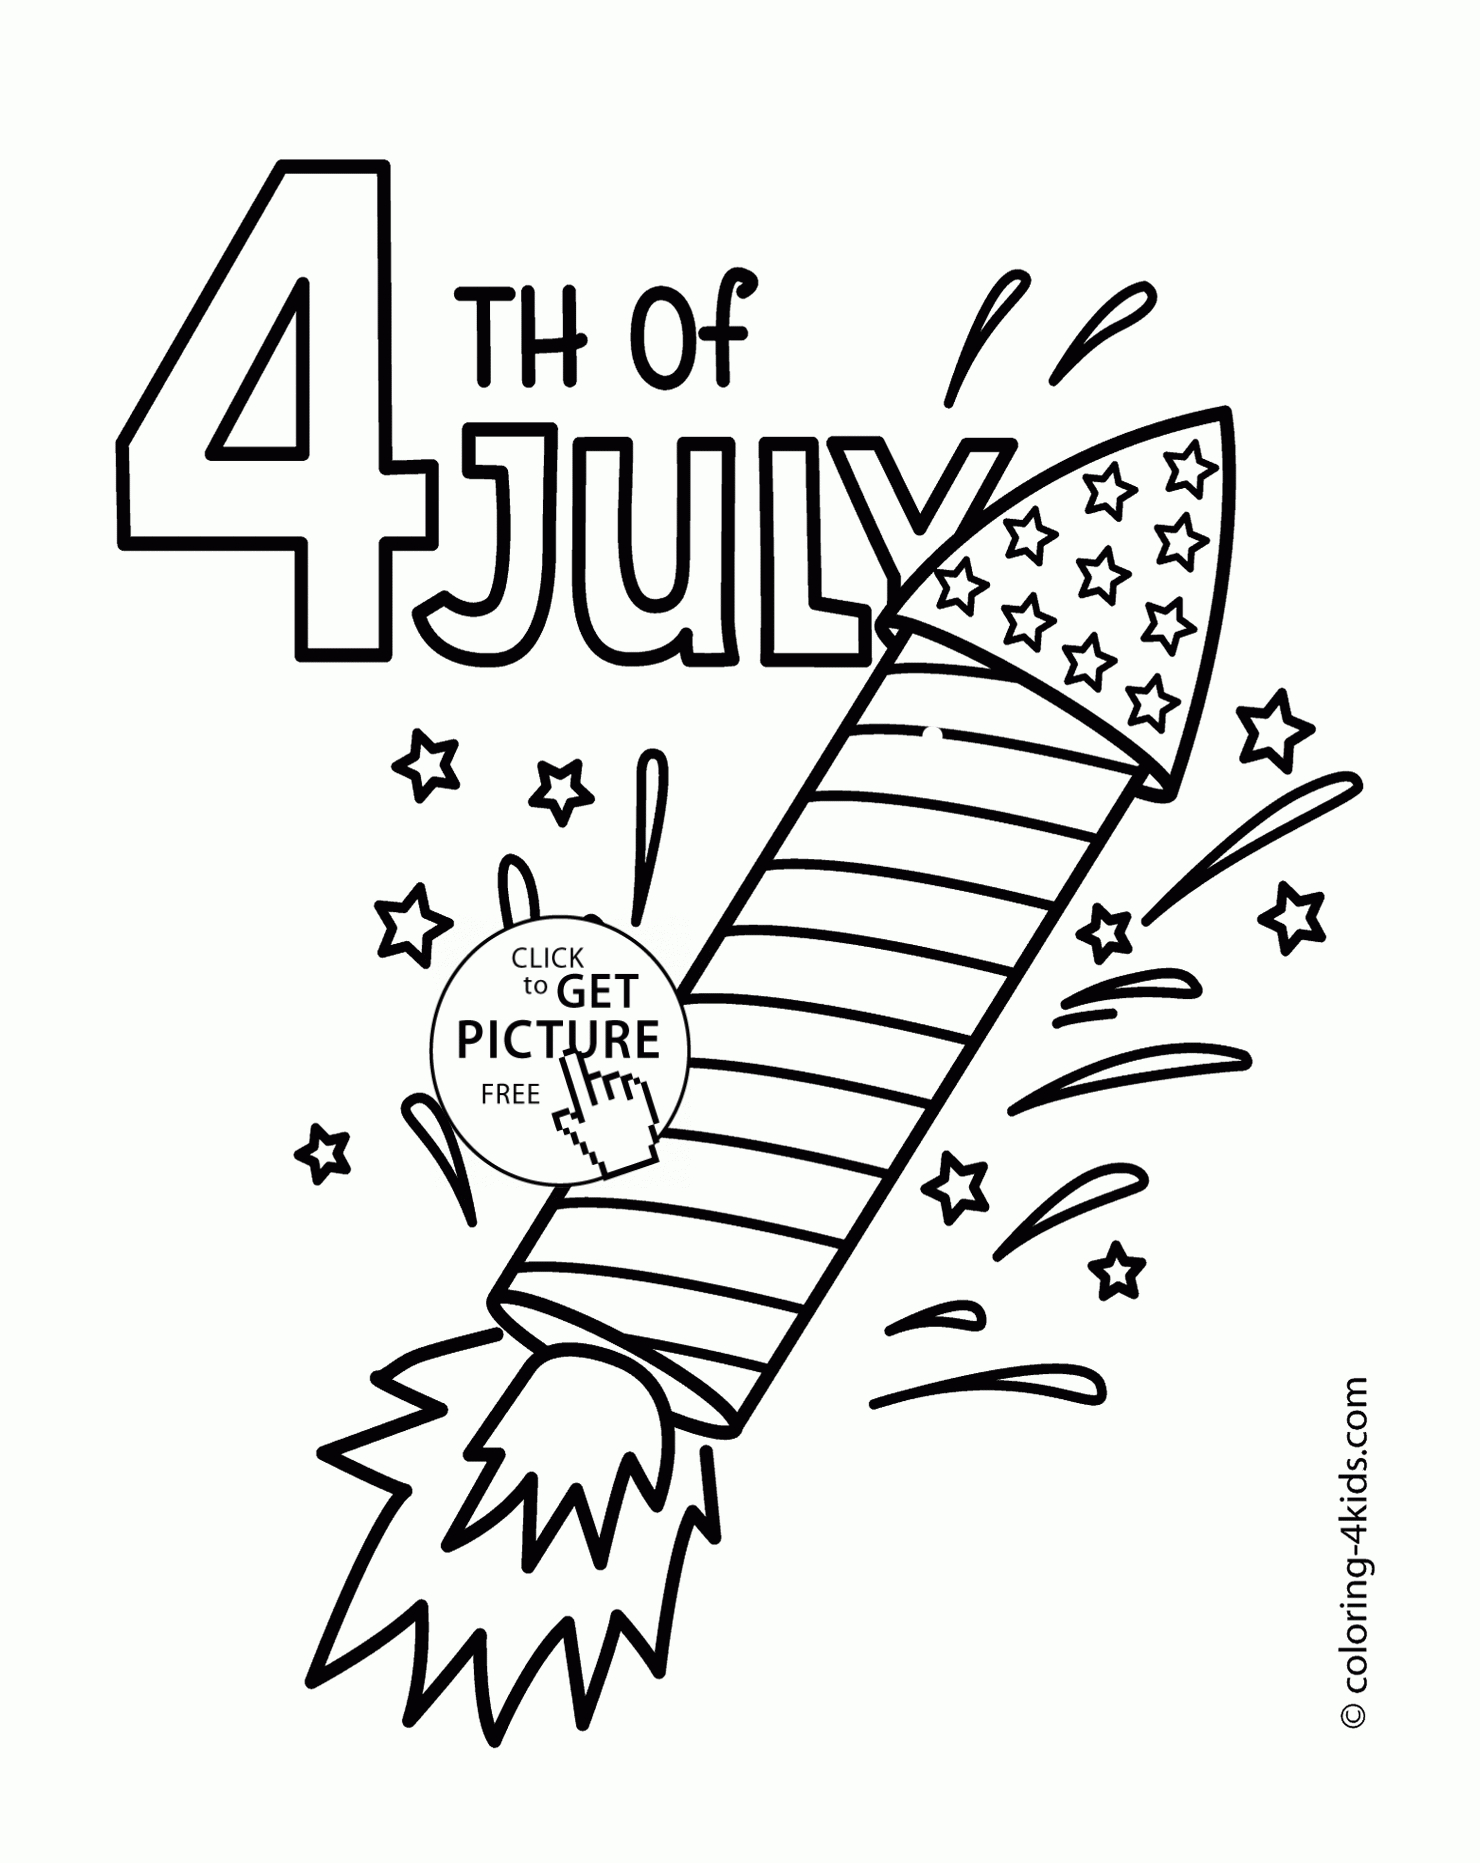 Usa Rocket Of 4Th Of July Coloring Page For Kids, Coloring Pages - Free Printable 4Th Of July Coloring Pages